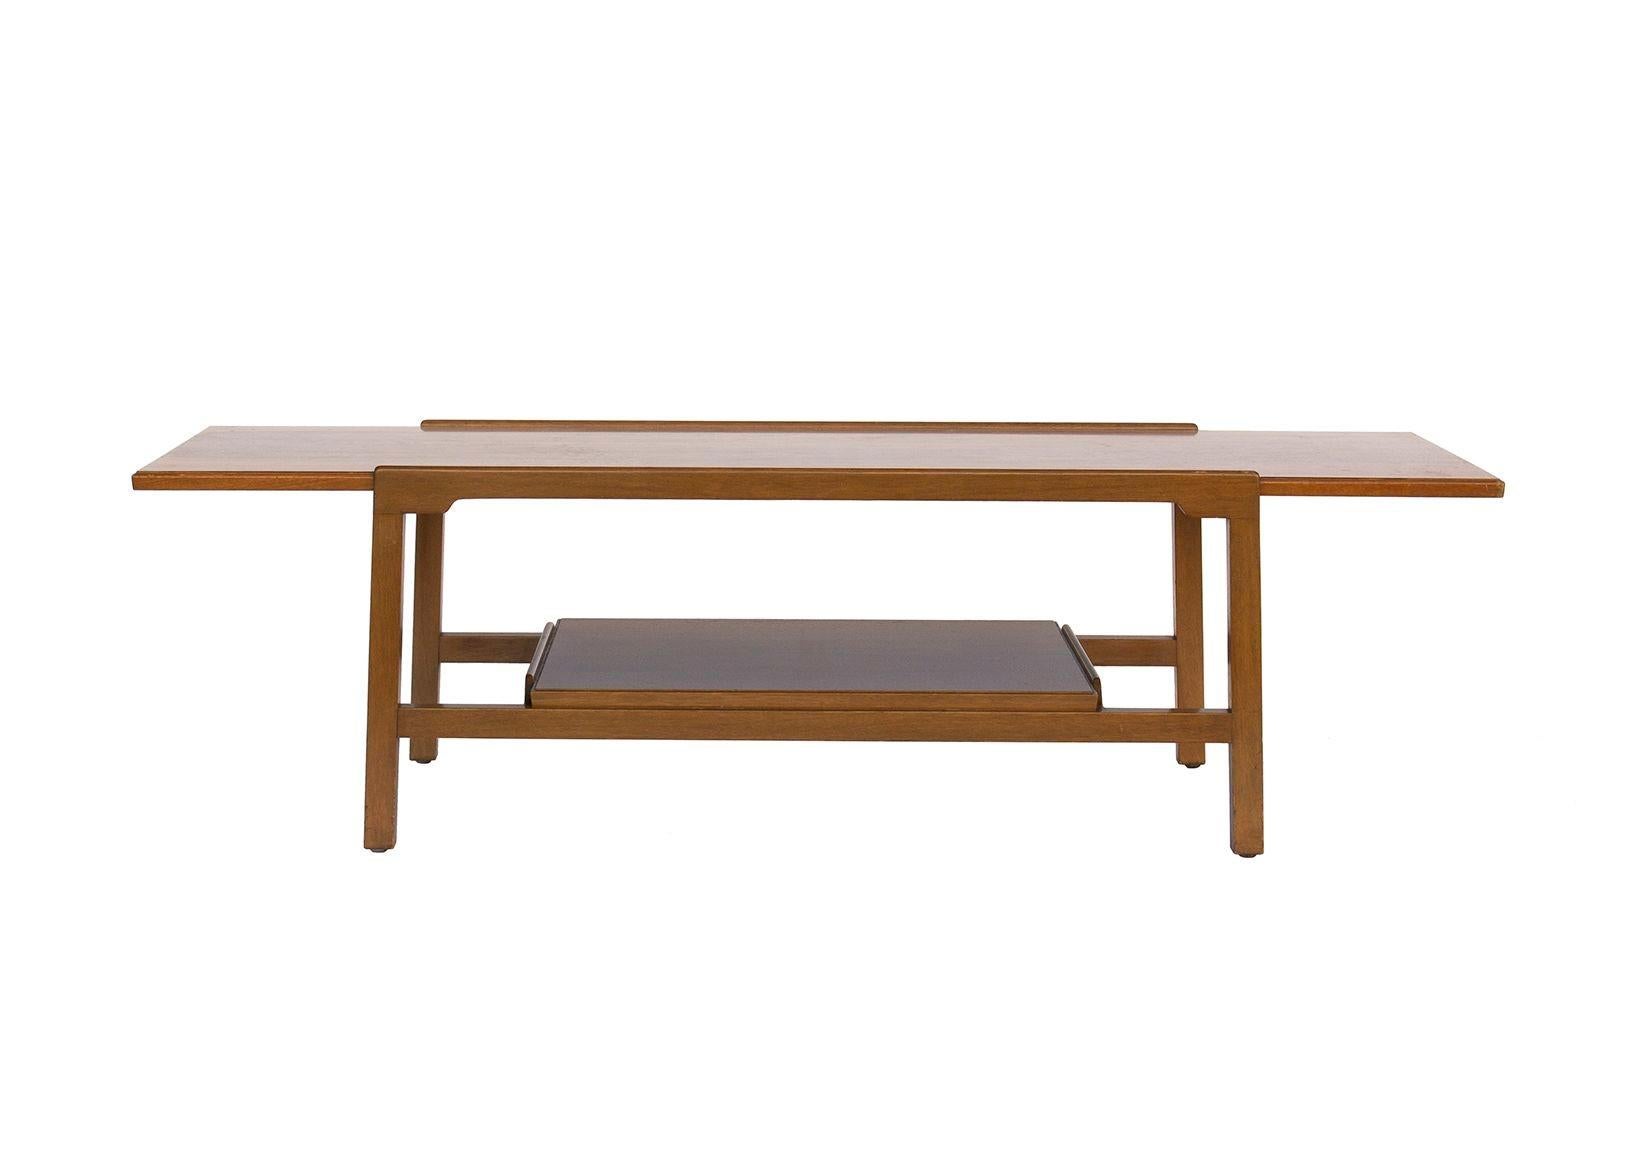 USA, 1950s
Walnut coffee table signed with Dunbar label. The top is in a faux walnut laminate, the frame in walnut. It has a shelf below the top surface, great for storing or display of magazines, books, or objects.
CONDITION NOTES: One leg is